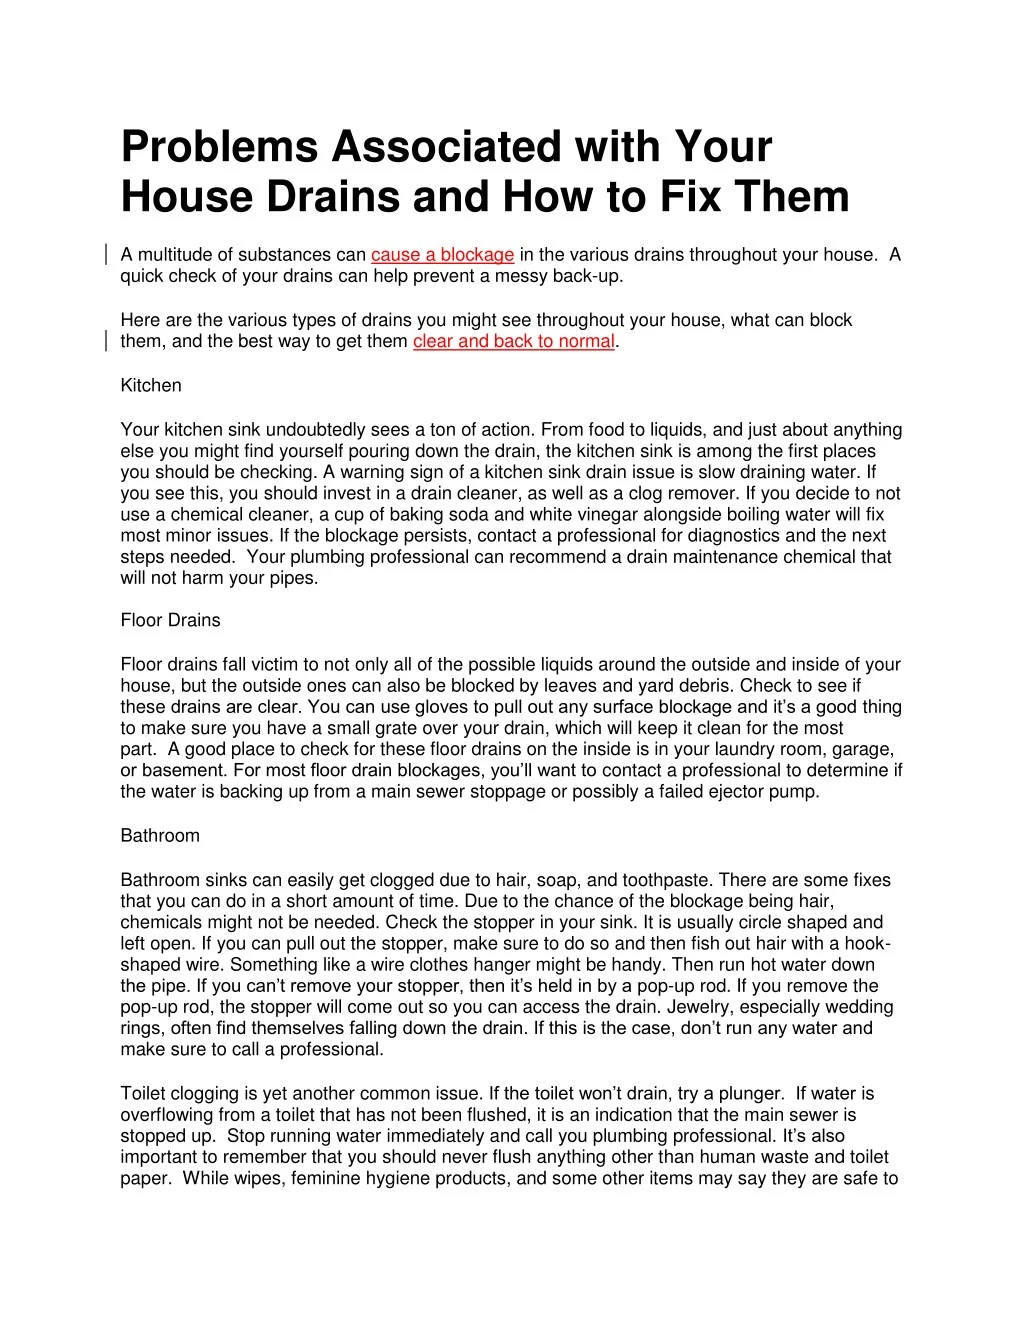 problems associated with your house drains